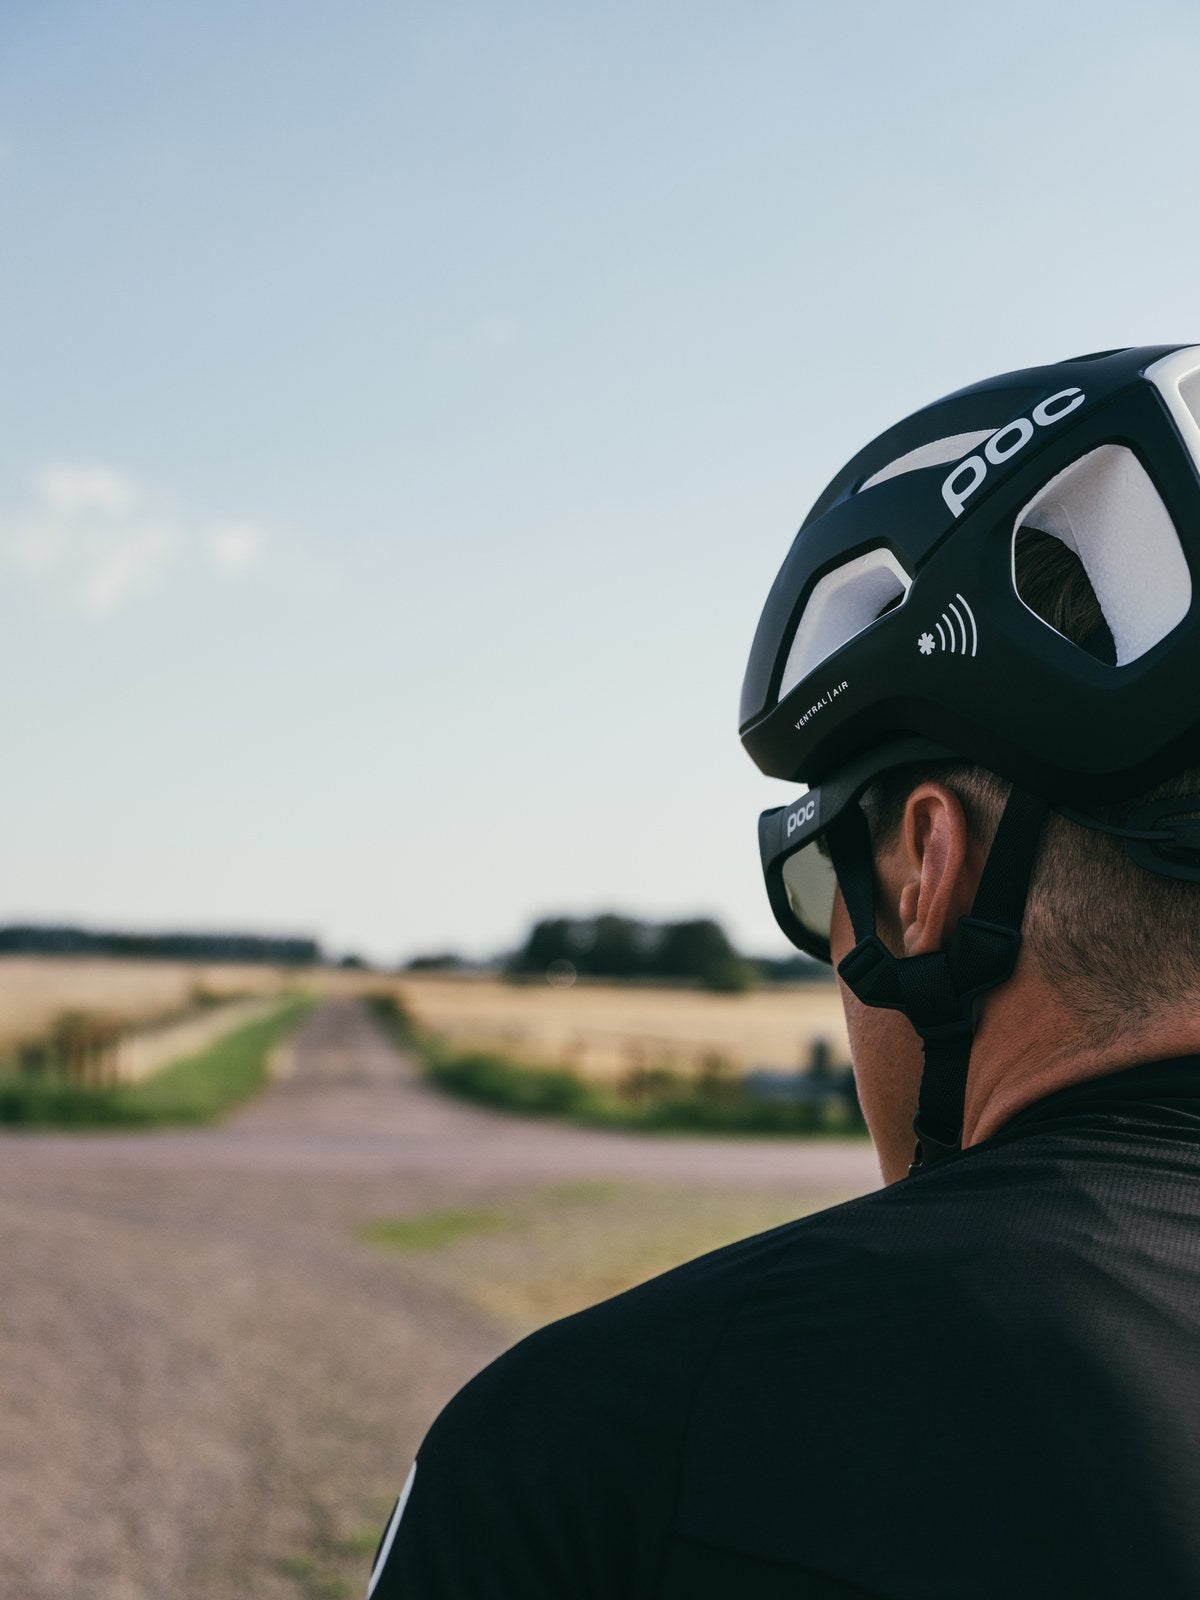 Kask Rowerowy POC VENTRAL AIR SPIN NFC